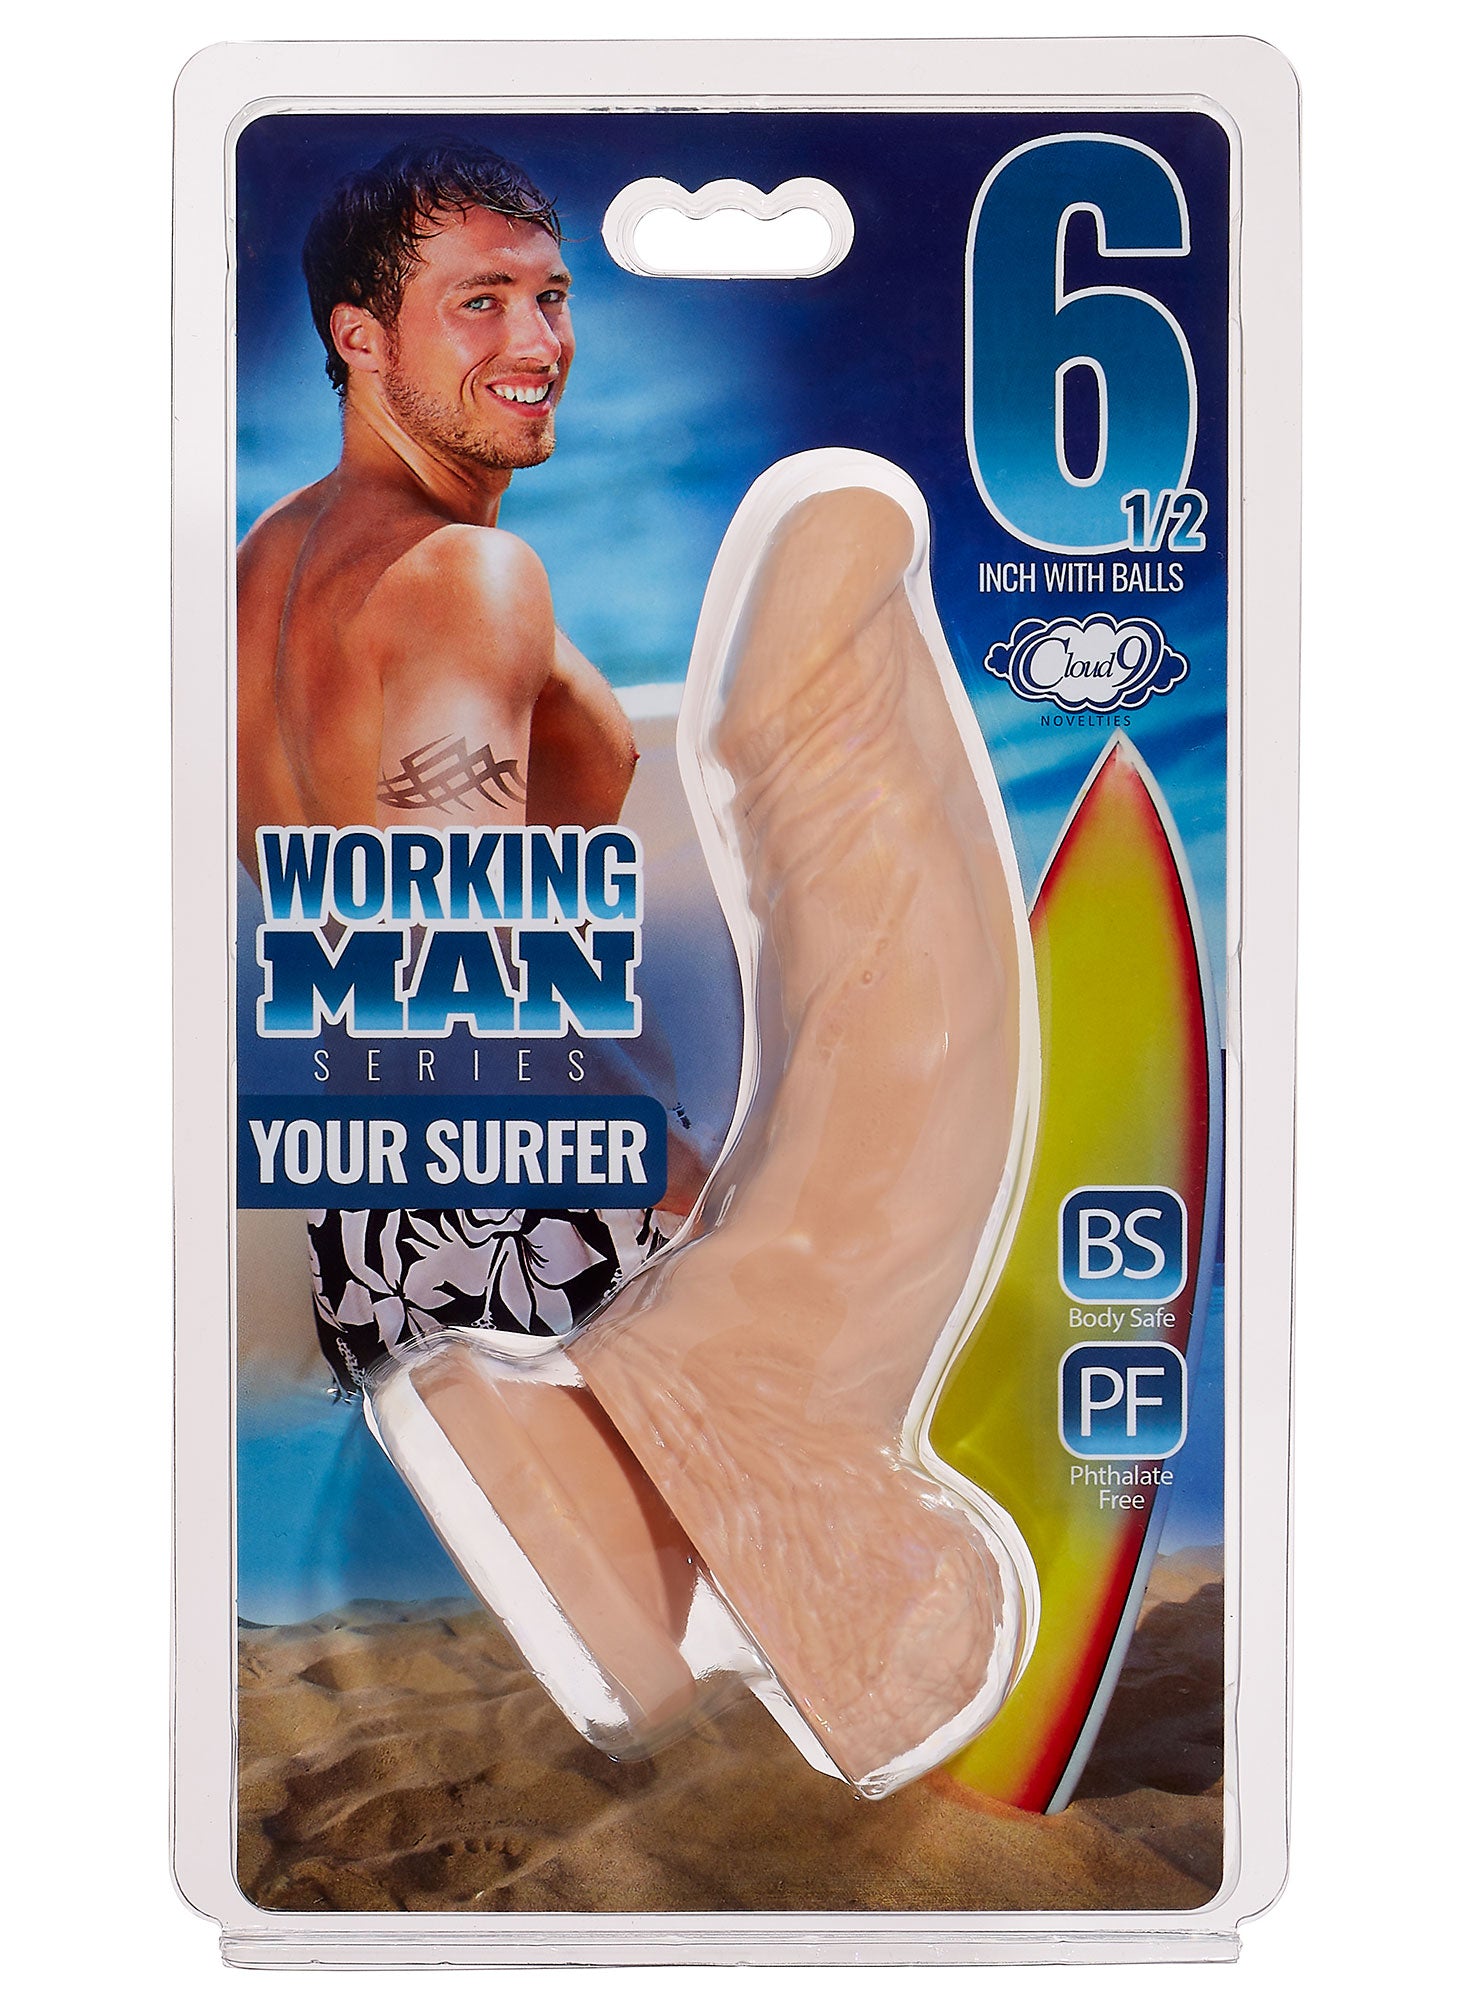 Cloud 9 Working Man 6.5 Inch With Balls - Your   Surfer - Light